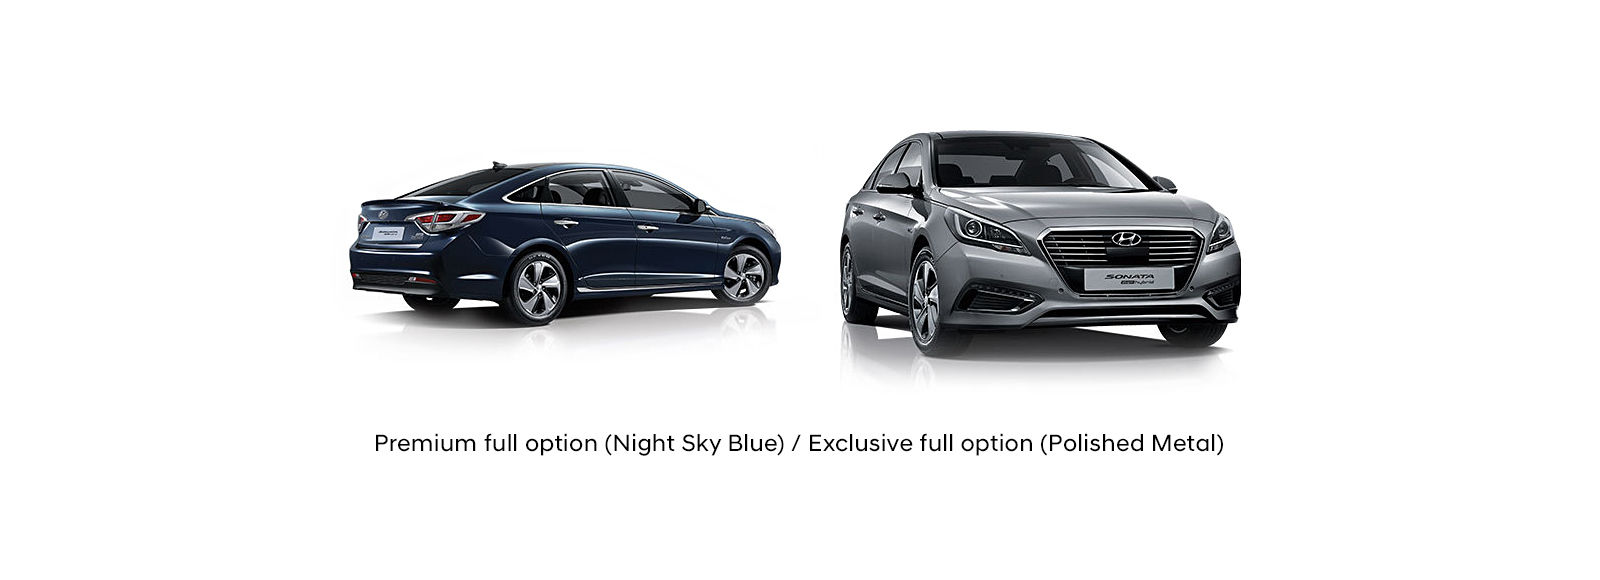 Side rear view of navy on the left and front view of gray Sonata Plug-in Hybrid on the right